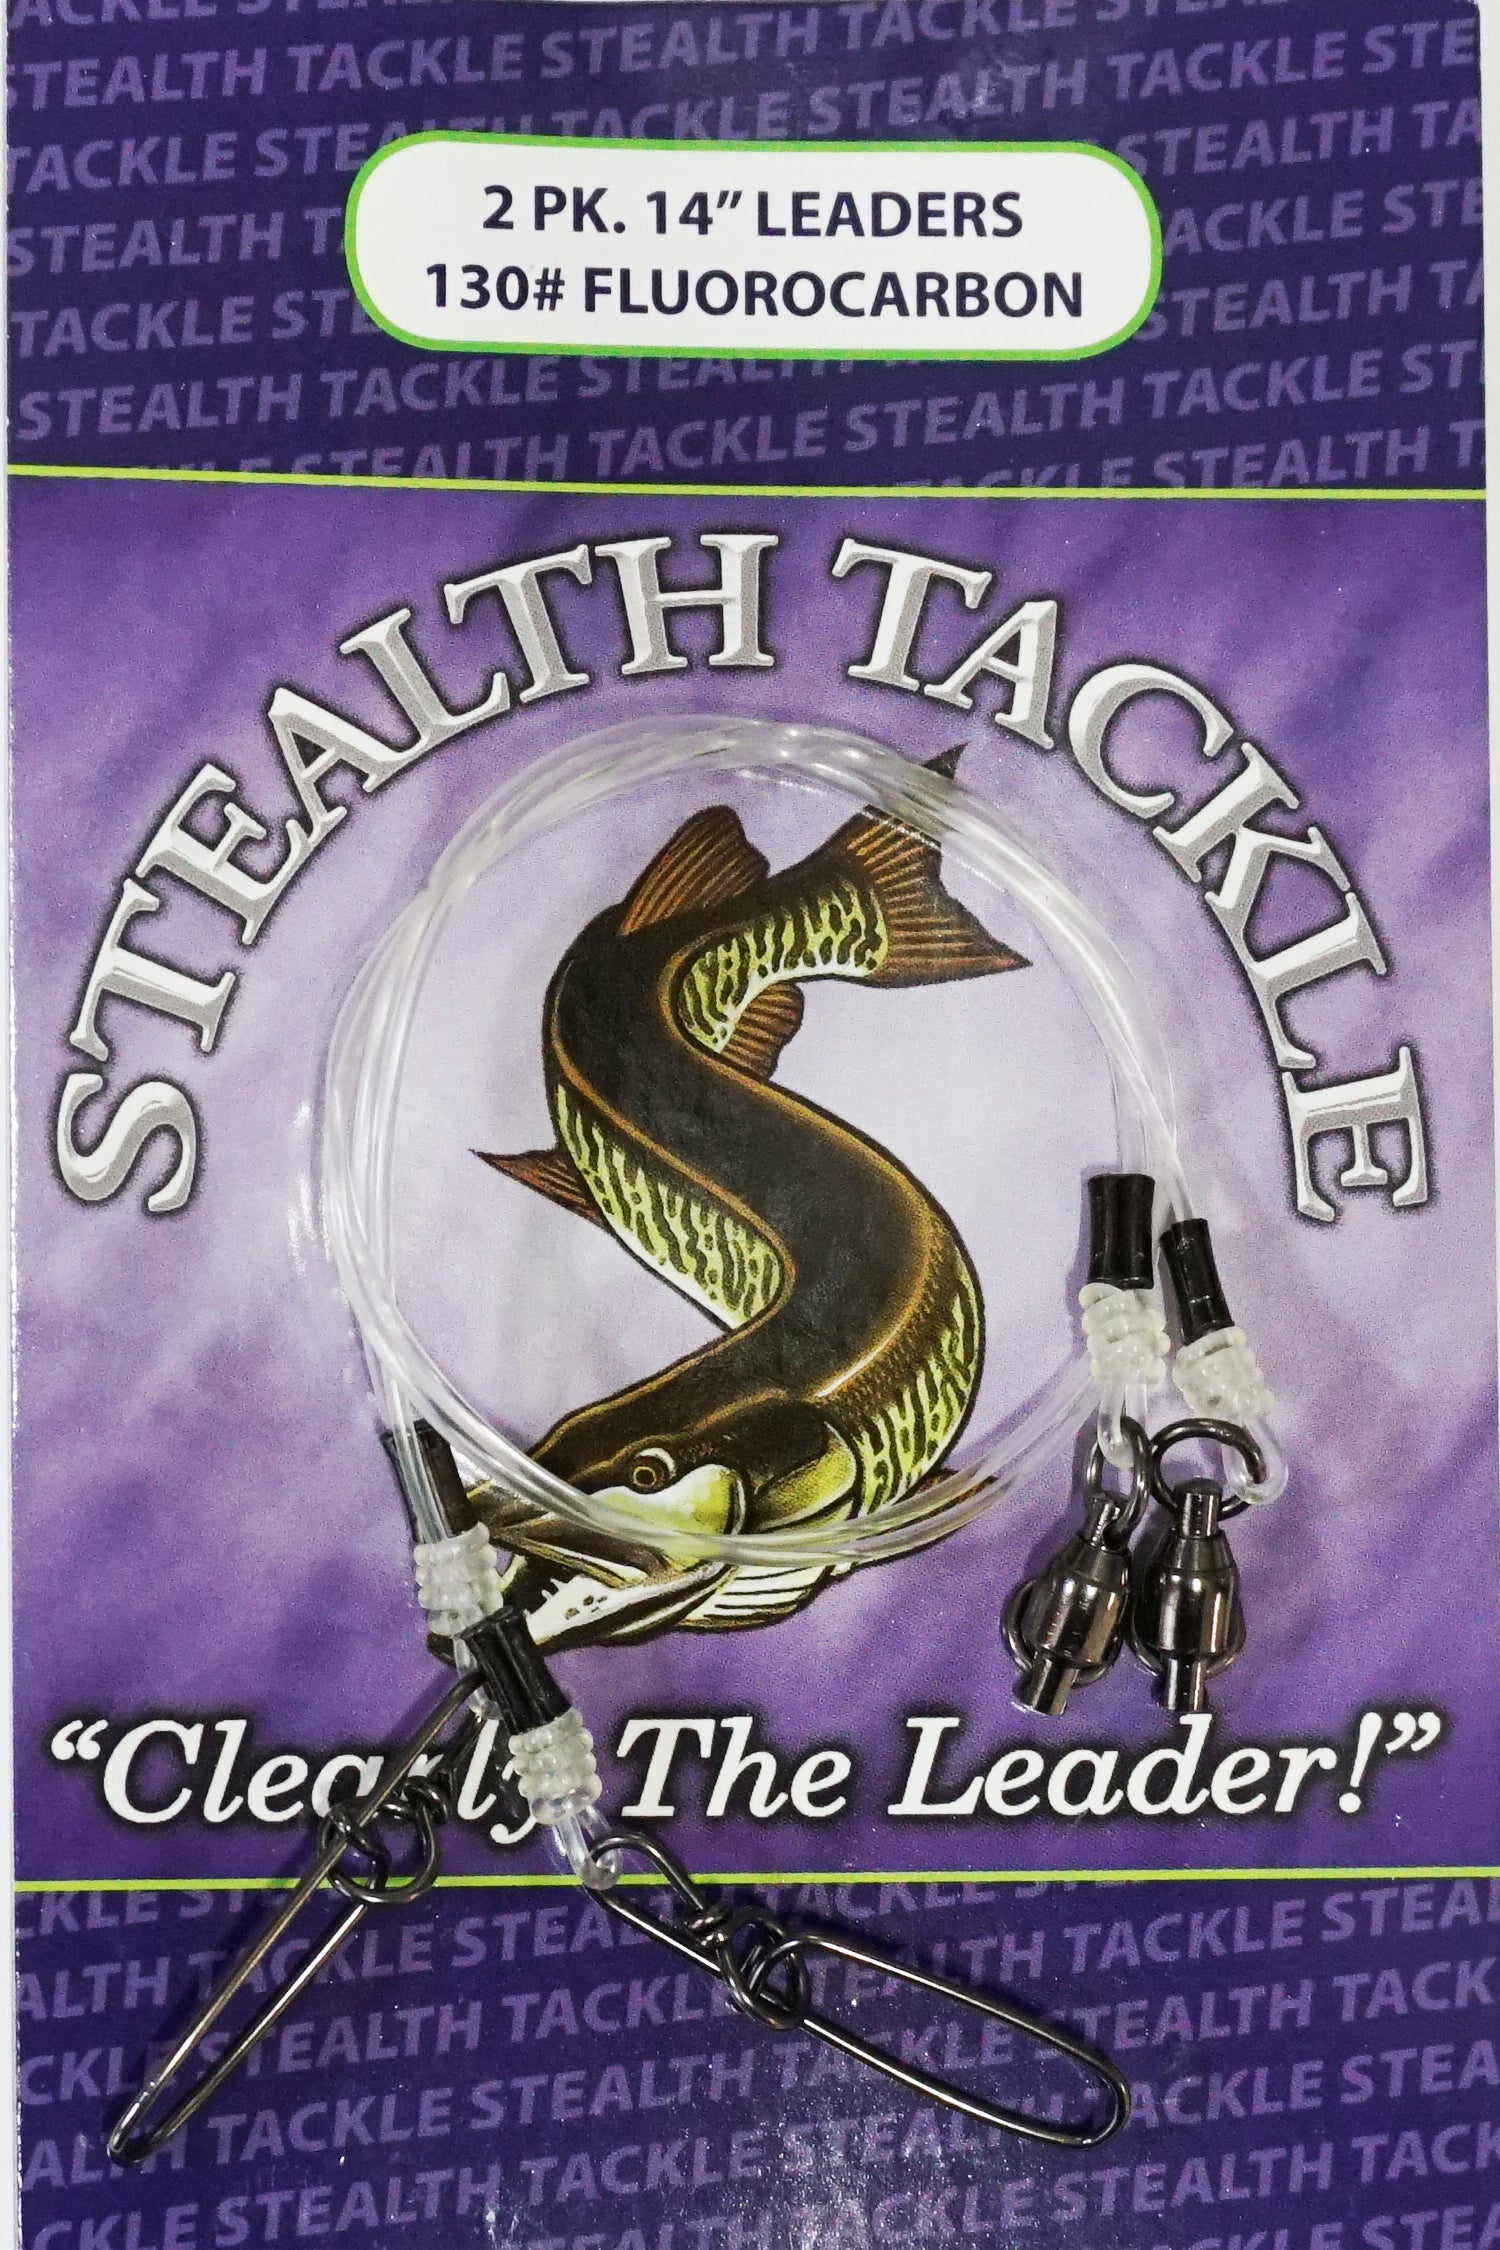 Single Pack 175# 49 Strand Wire Leader - Stealth Tackle